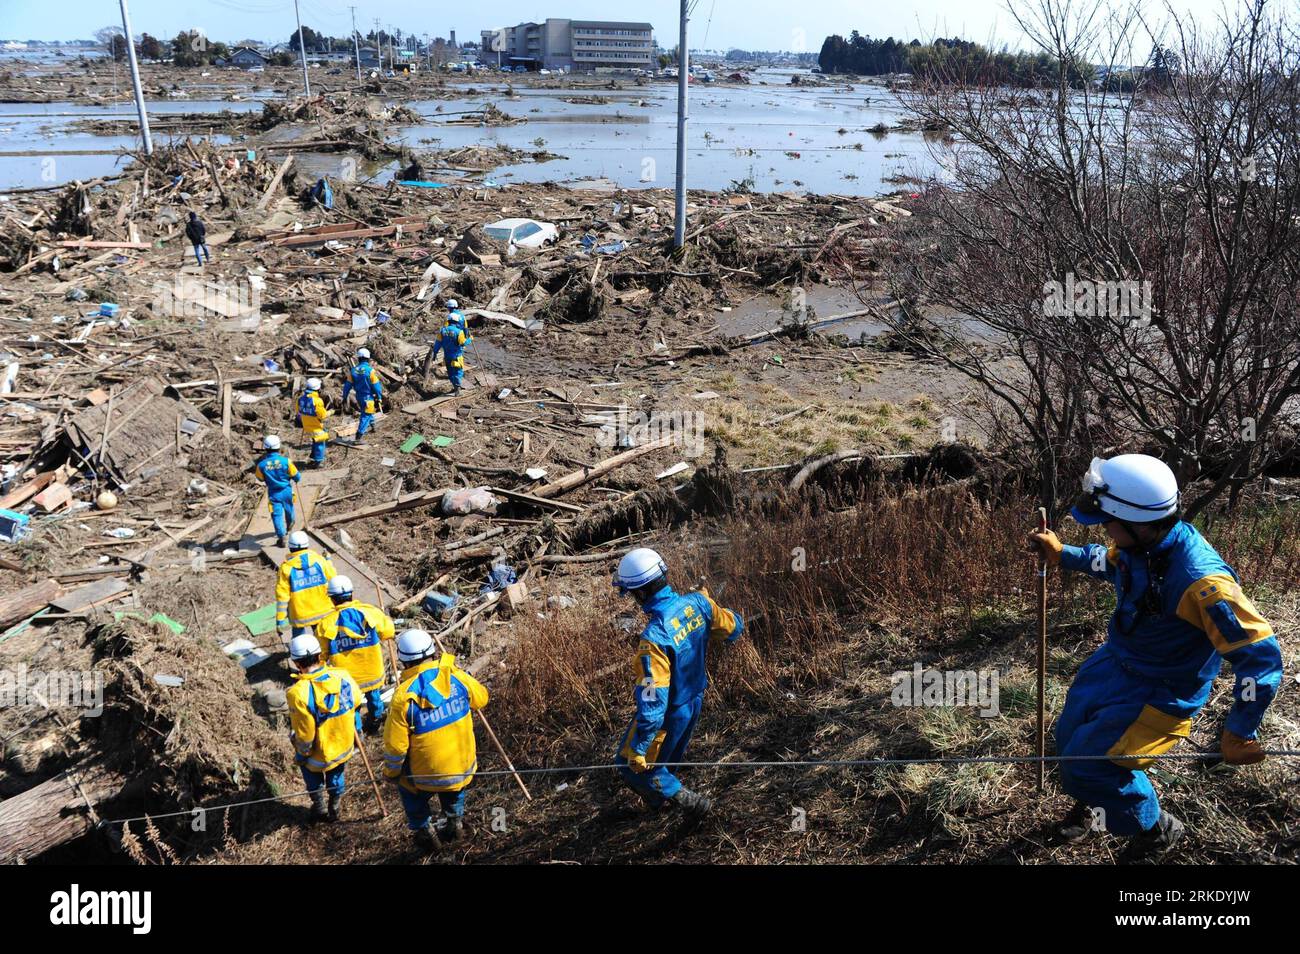 Bildnummer: 55019329  Datum: 13.03.2011  Copyright: imago/Xinhua SENDAI, March 13, 2011 (Xinhua) -- Rescuers work at Sanbontsuka of Wakabayashi in Sendai City, Miyagi Prefecture, Japan, March 13, 2011. The area lost contact with the outside world after Friday s quake and tsunami. Friday s catastrophic earthquake in Japan and the following devastating tsunami have ravaged the country, while massive rescue and recovery efforts have been quickly launched to save lives and minimize losses. (Xinhua/Ji Chunpeng)(yc) JAPAN-QUAKE PUBLICATIONxNOTxINxCHN Gesellschaft Naturkatastrophe Erdbeben Tsunami kb Stock Photo